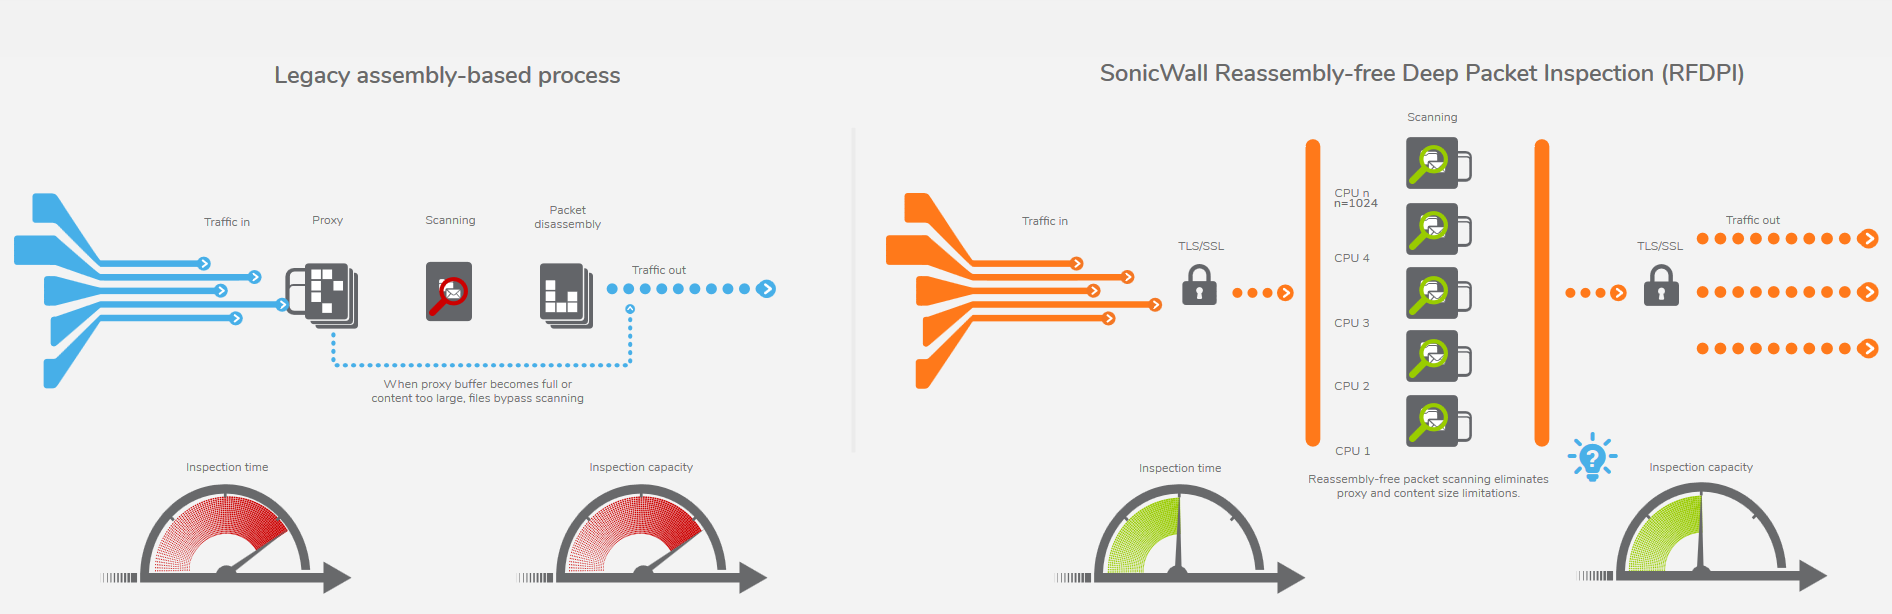 SonicWall Reassembly-free Deep Packet Inspection (RFDPI)